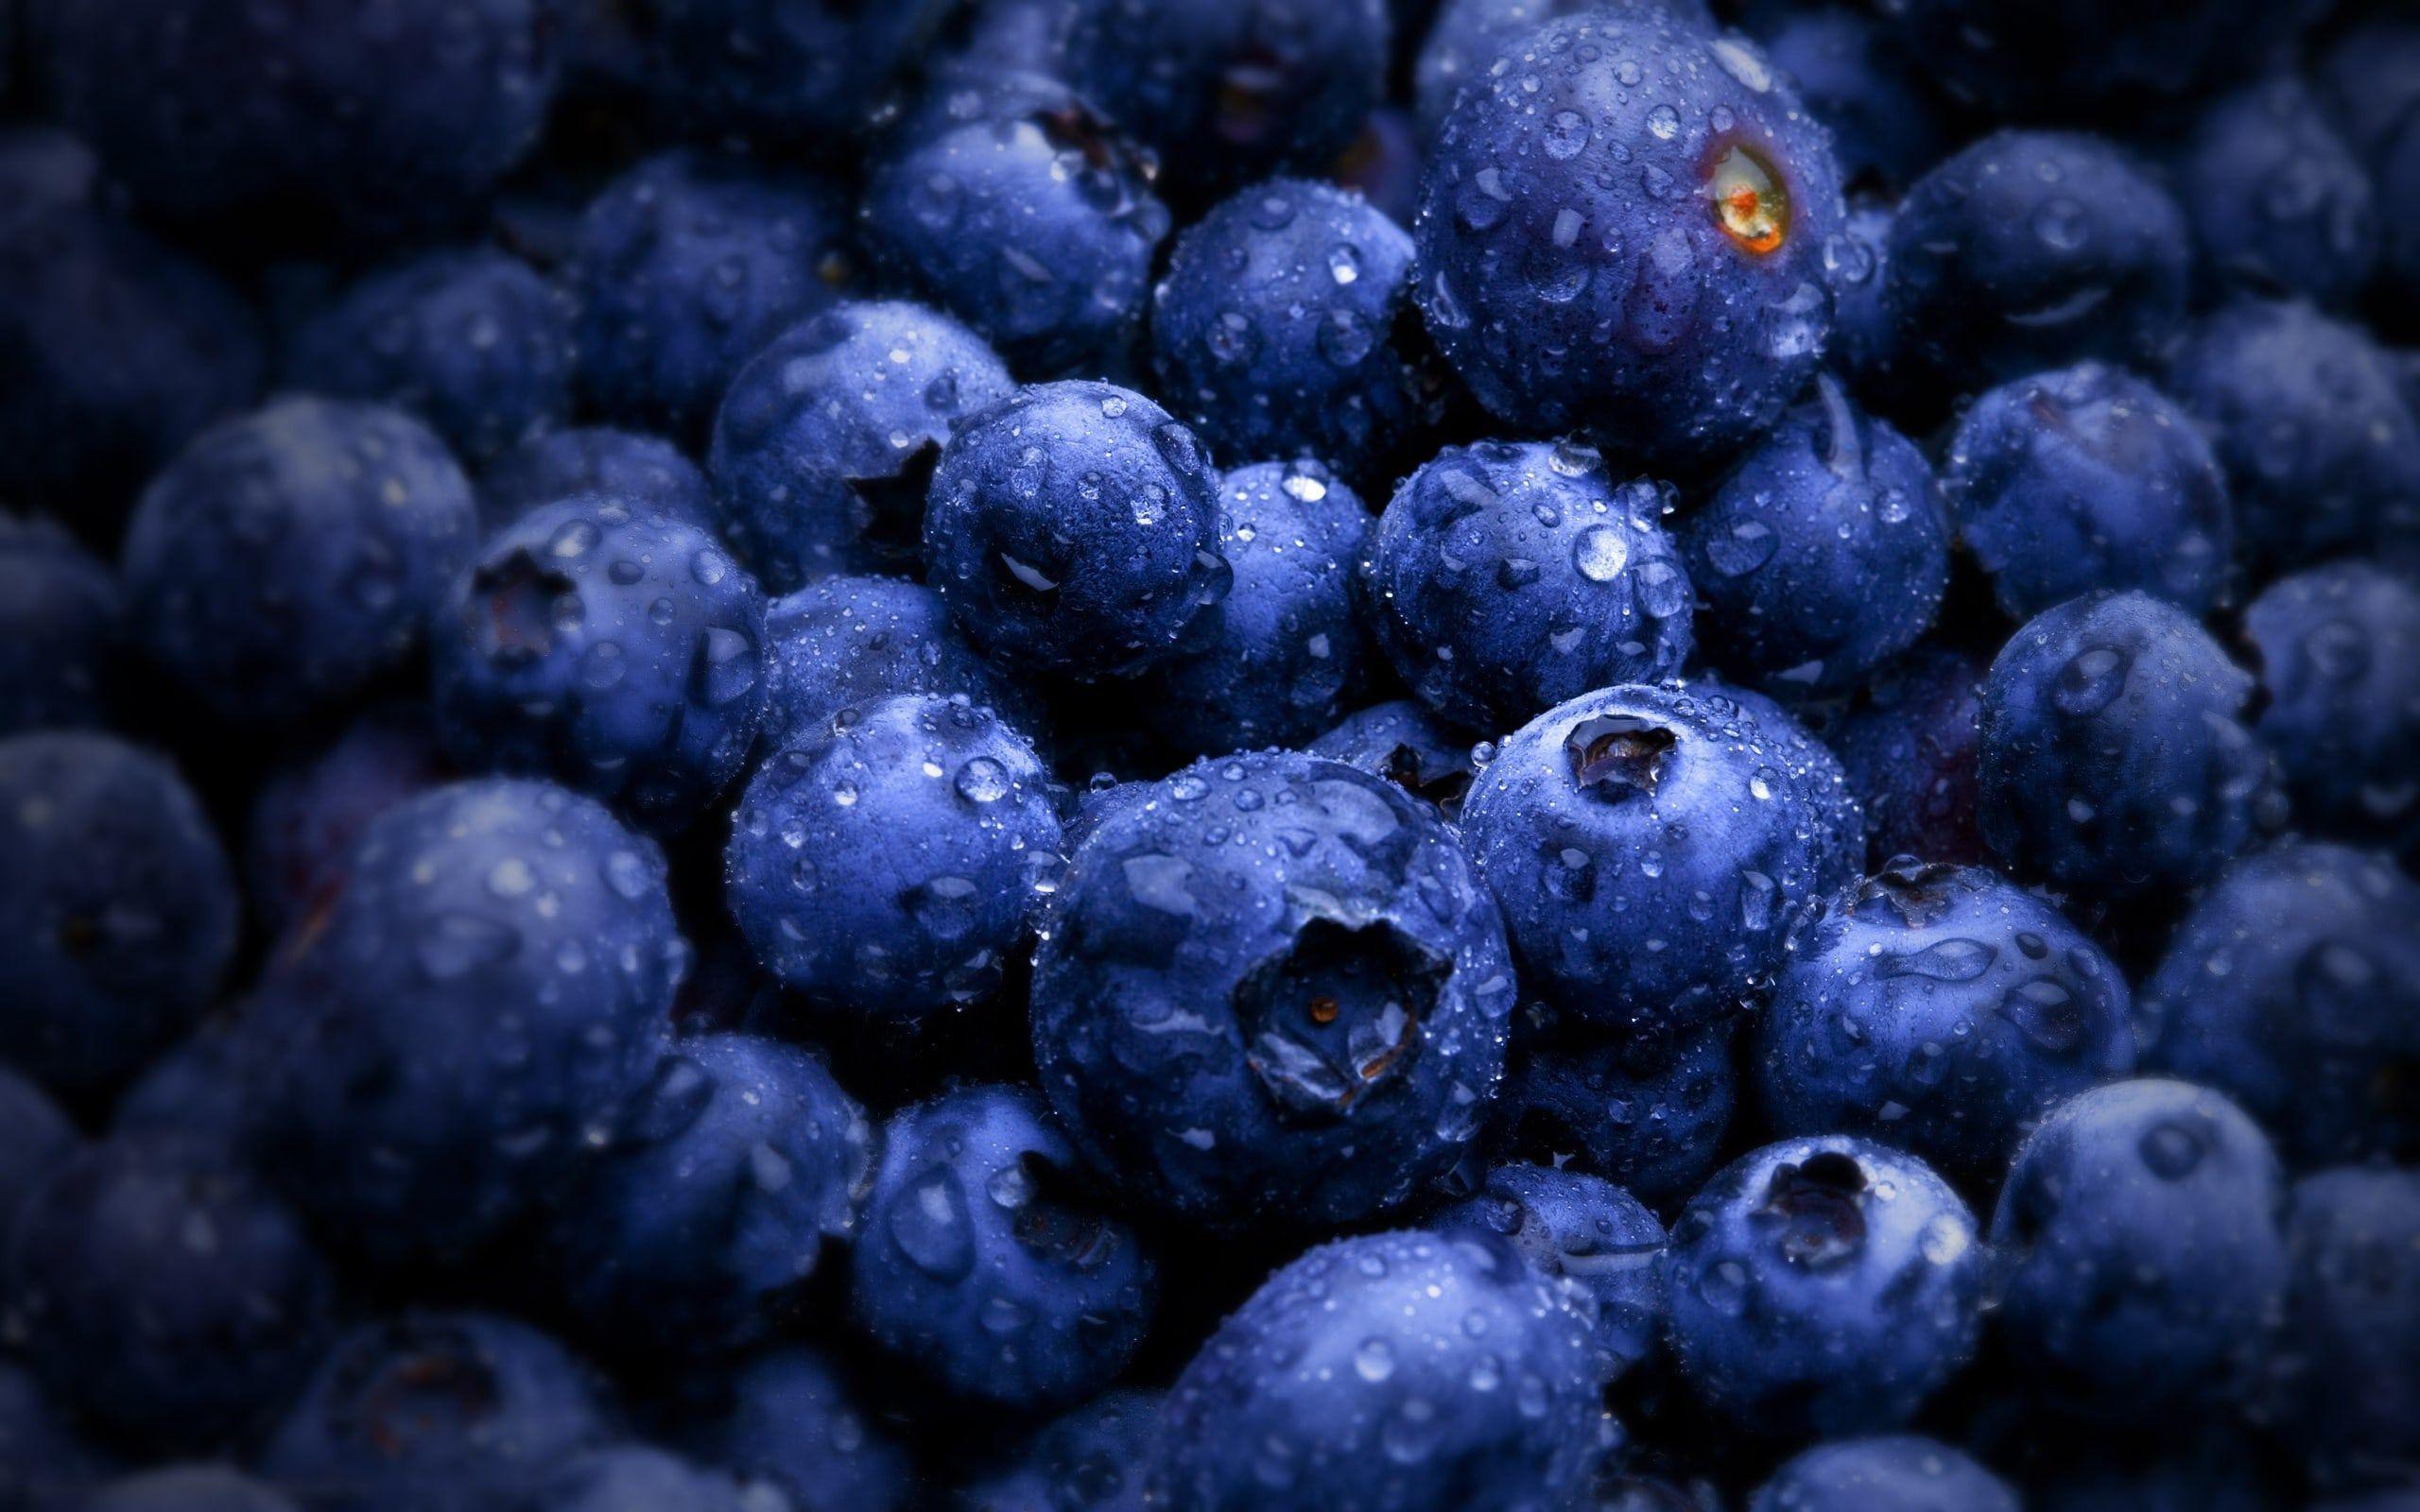 274480 Blueberry Blue Berry Fruit Superfood Samsung Galaxy A7 2017  wallpaper full hd 1080x1920  Rare Gallery HD Wallpapers